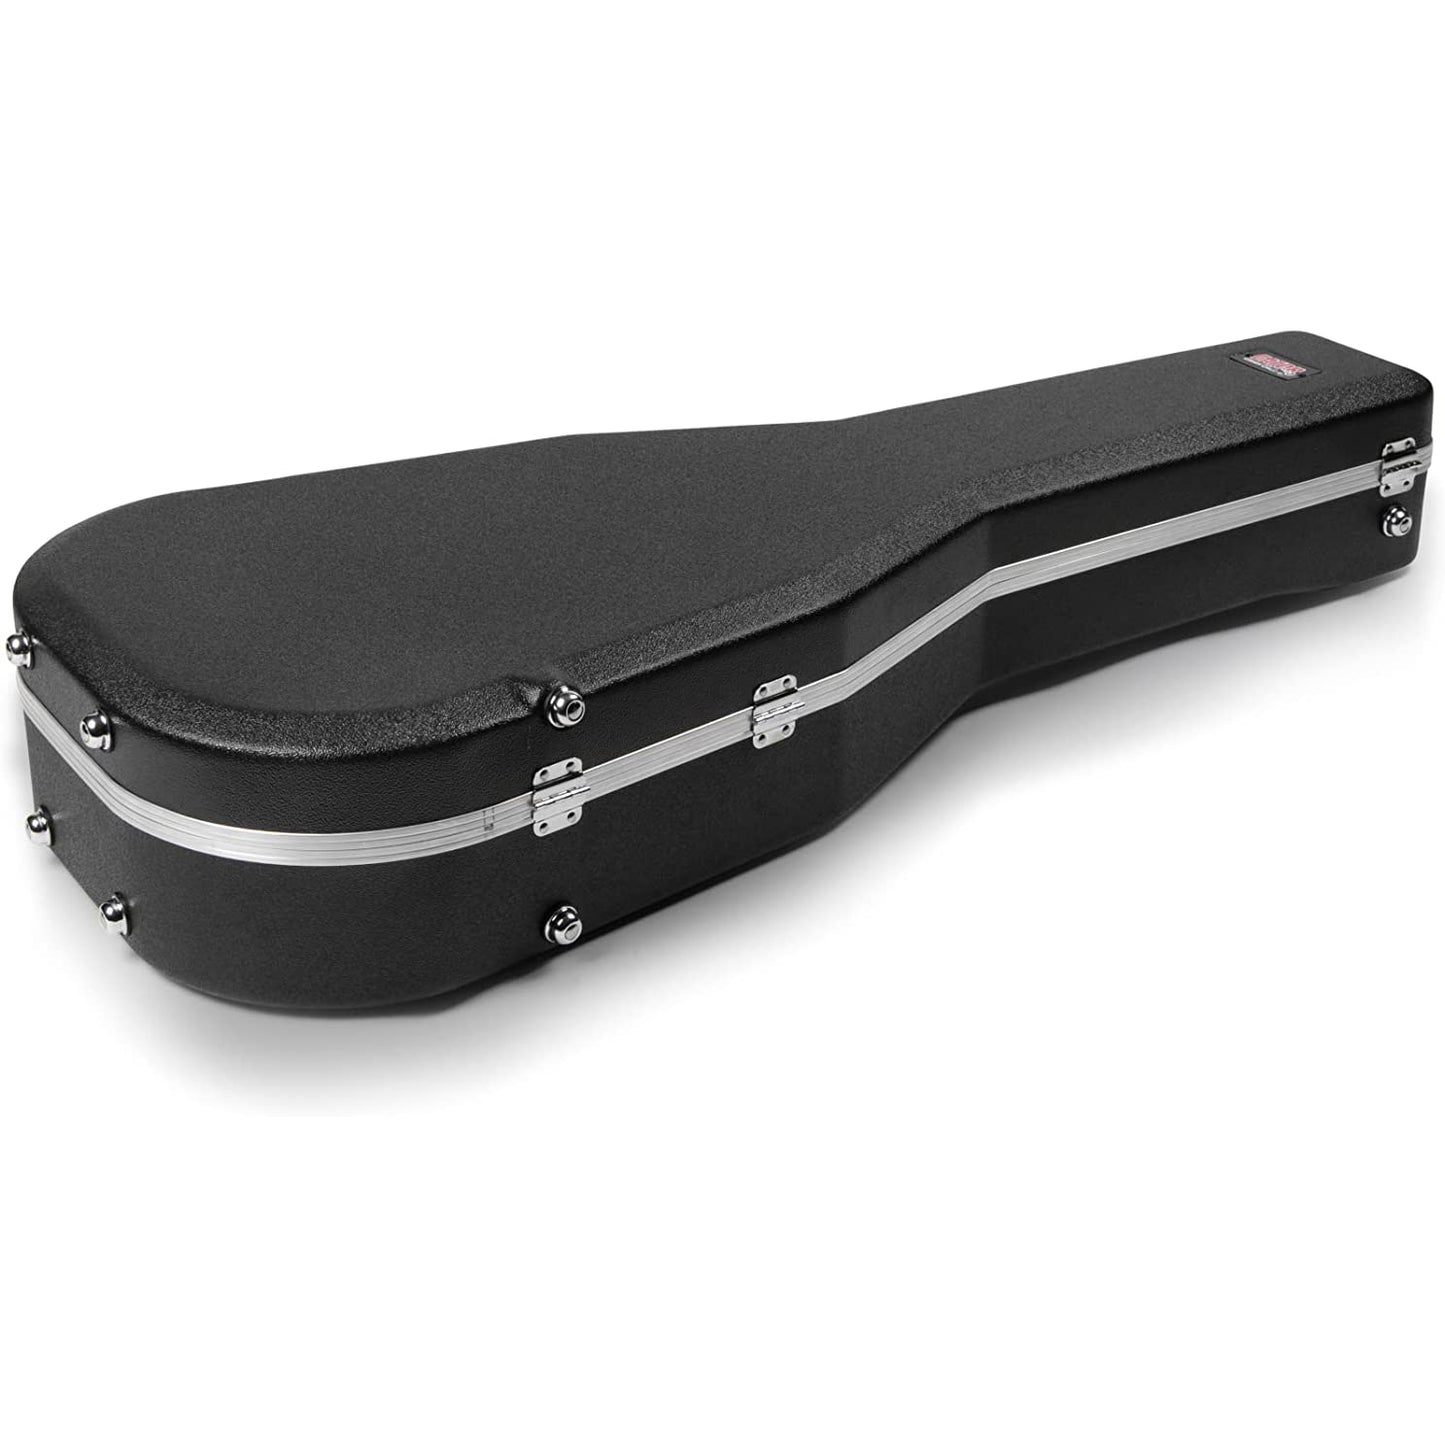 Gator GC-PARLOR Deluxe Molded Case for Parlor Guitars